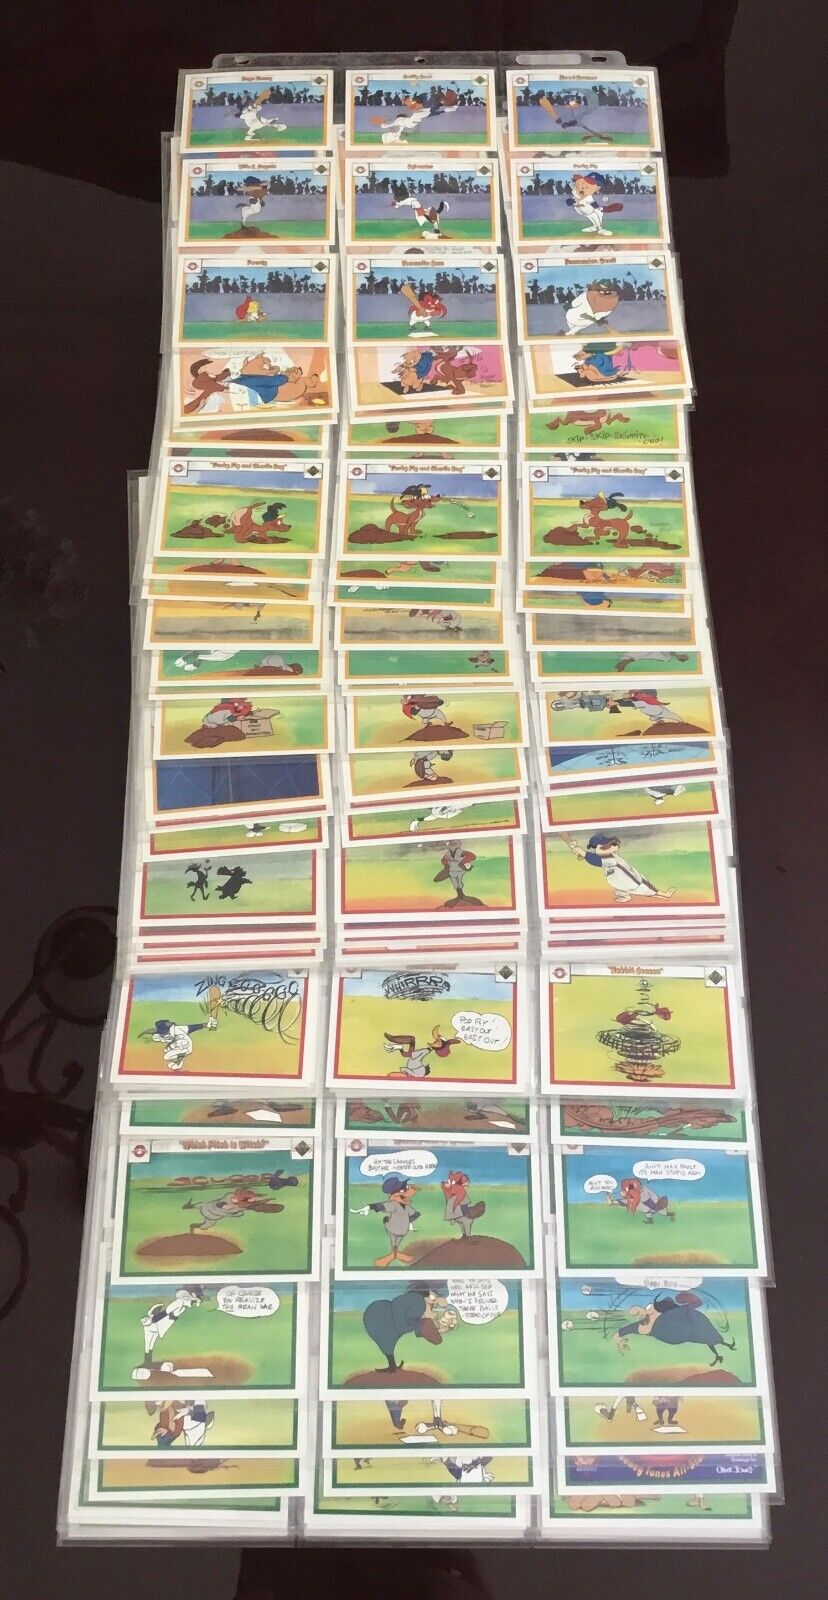 1990 Upper Deck Looney Tunes Comic Ball Set #1-594 (99%  complete + extra cards)